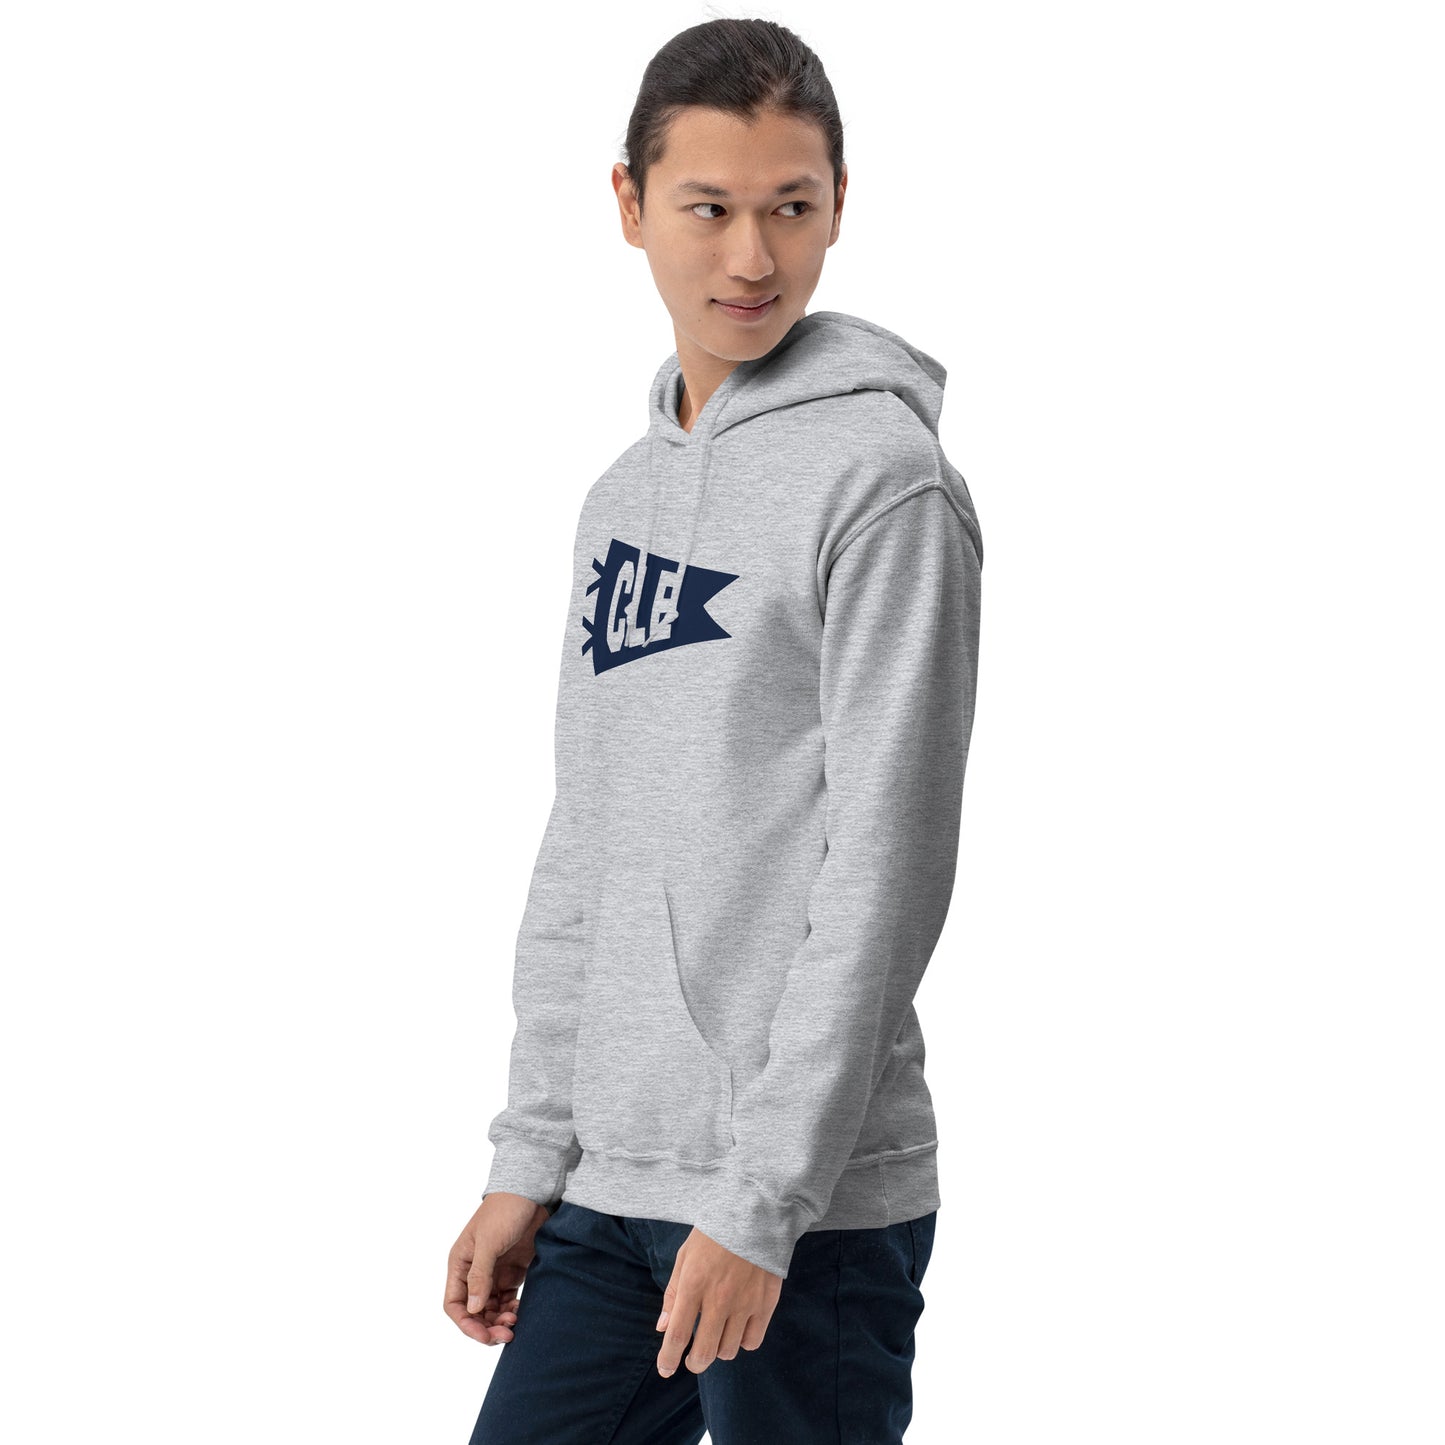 Airport Code Unisex Hoodie - Navy Blue Graphic • CLE Cleveland • YHM Designs - Image 10